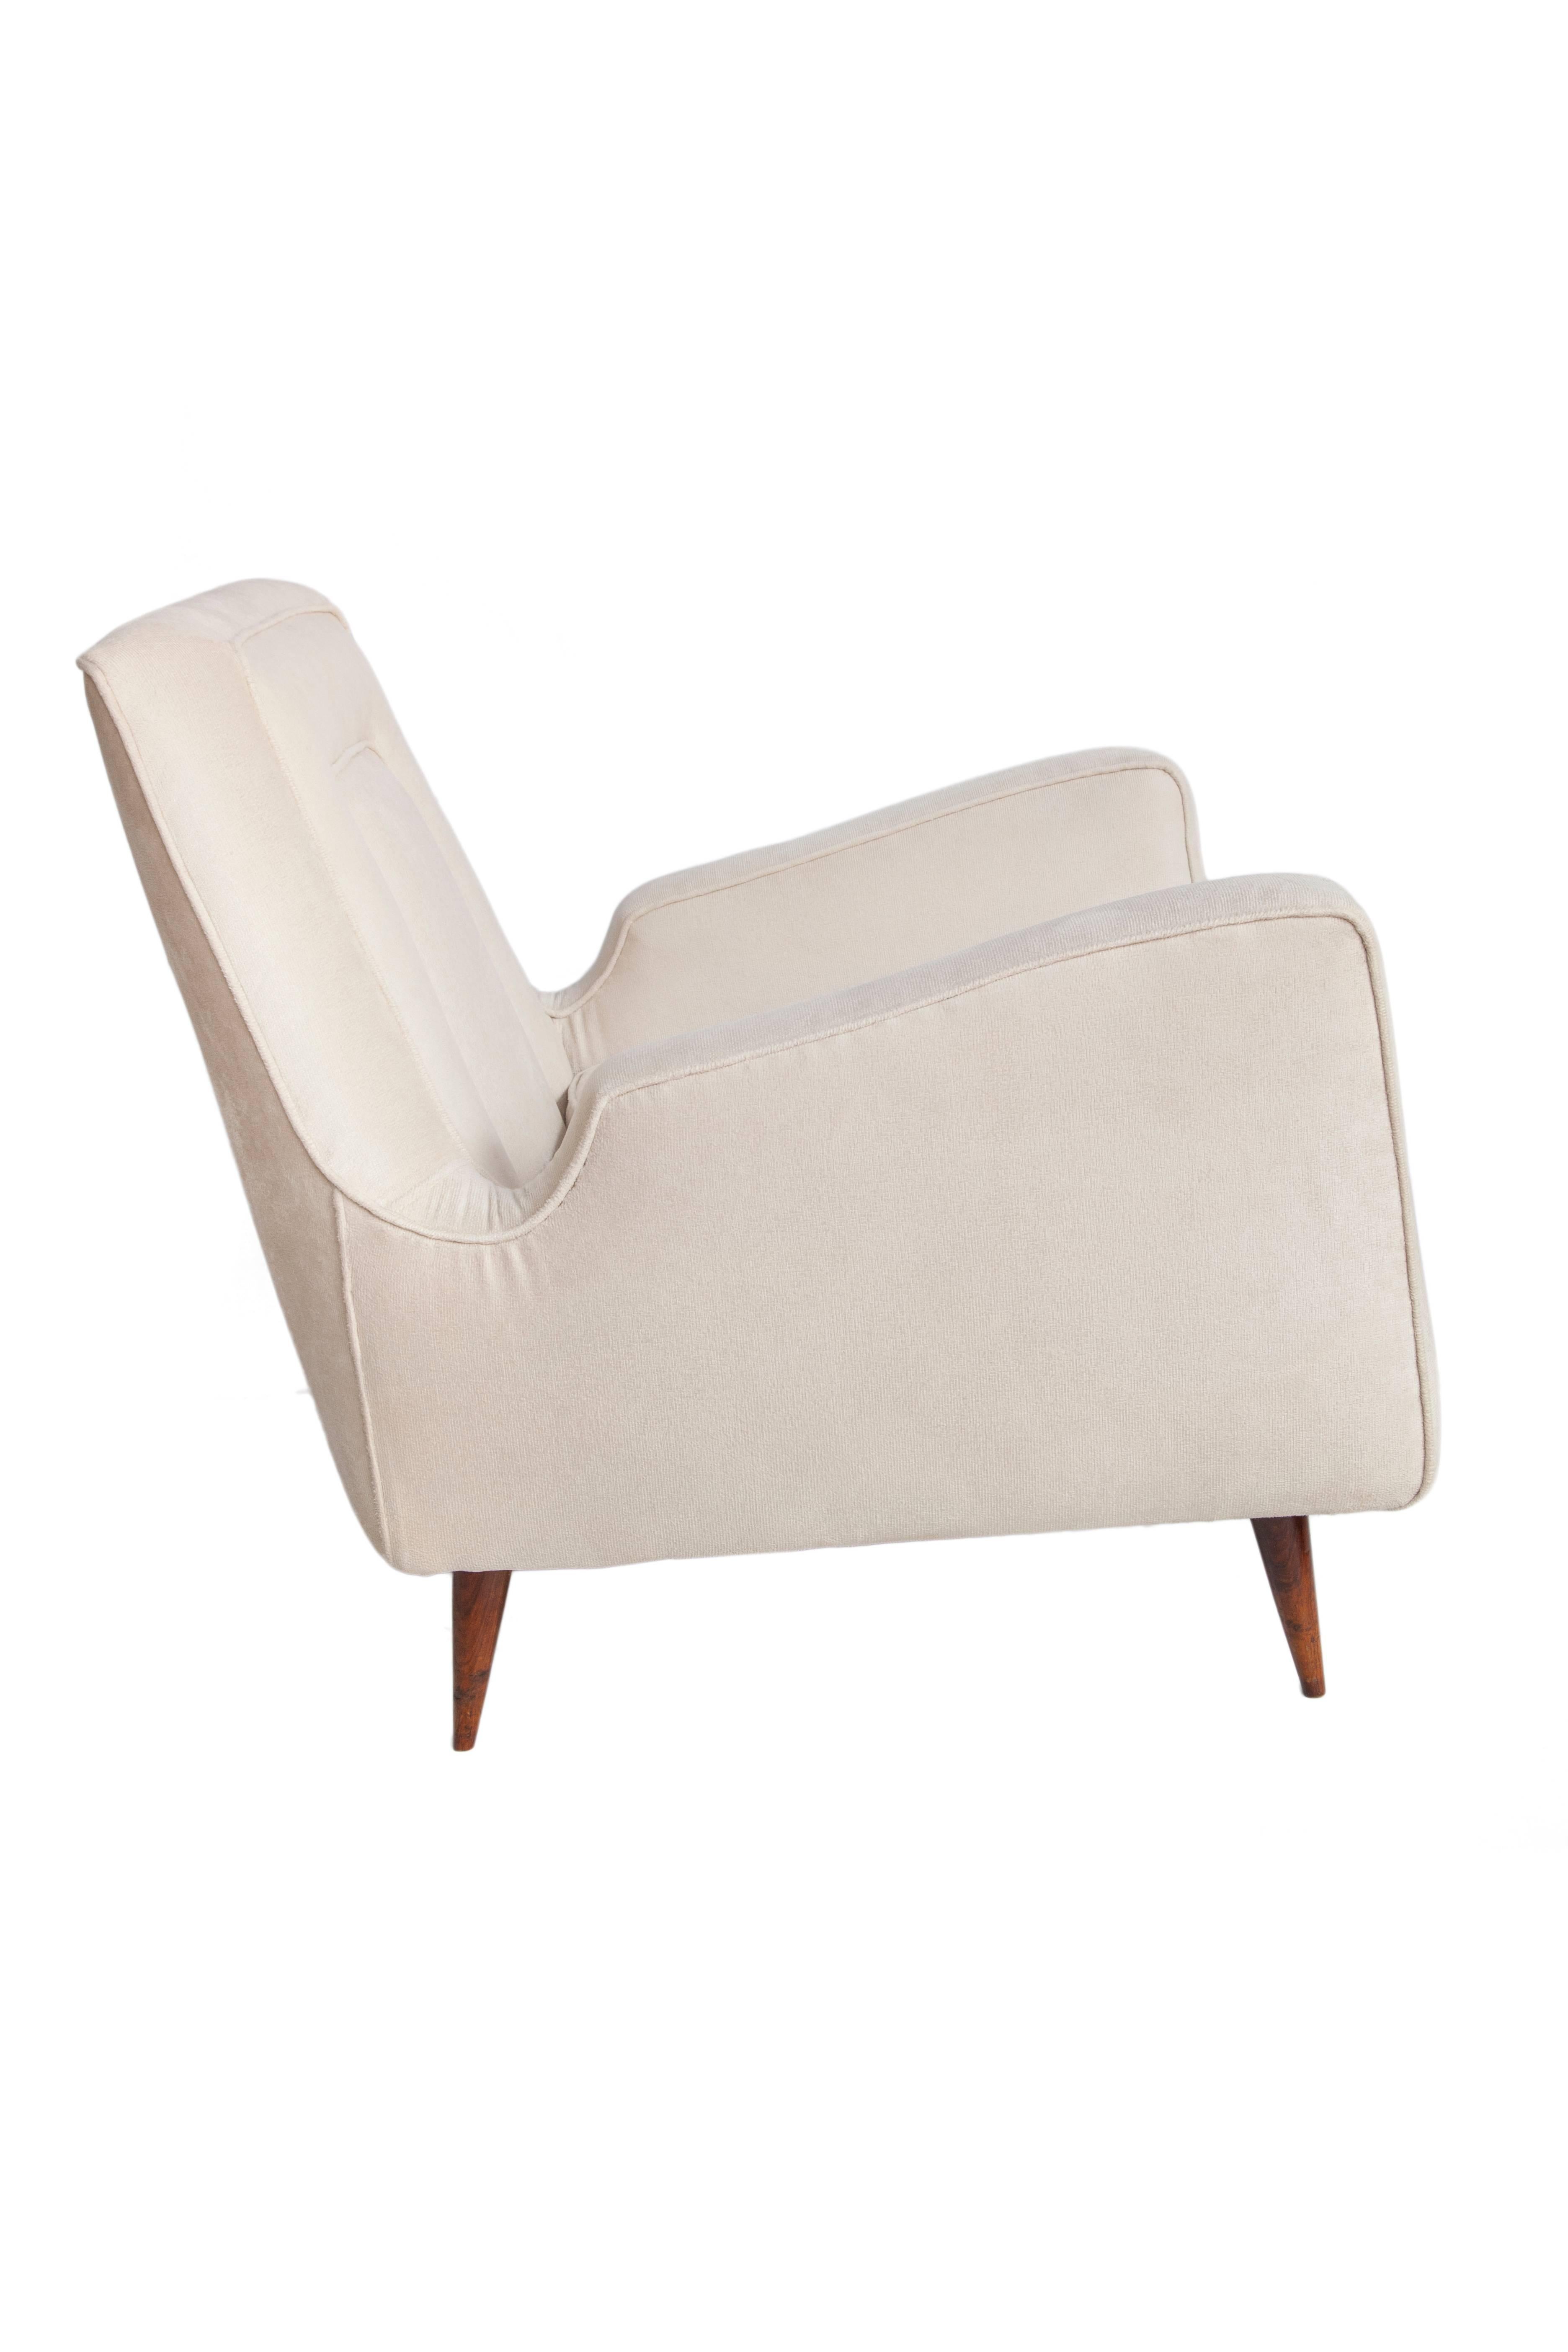 Brazilian Mid-Century Modern Armchairs in Artificial Suede 1